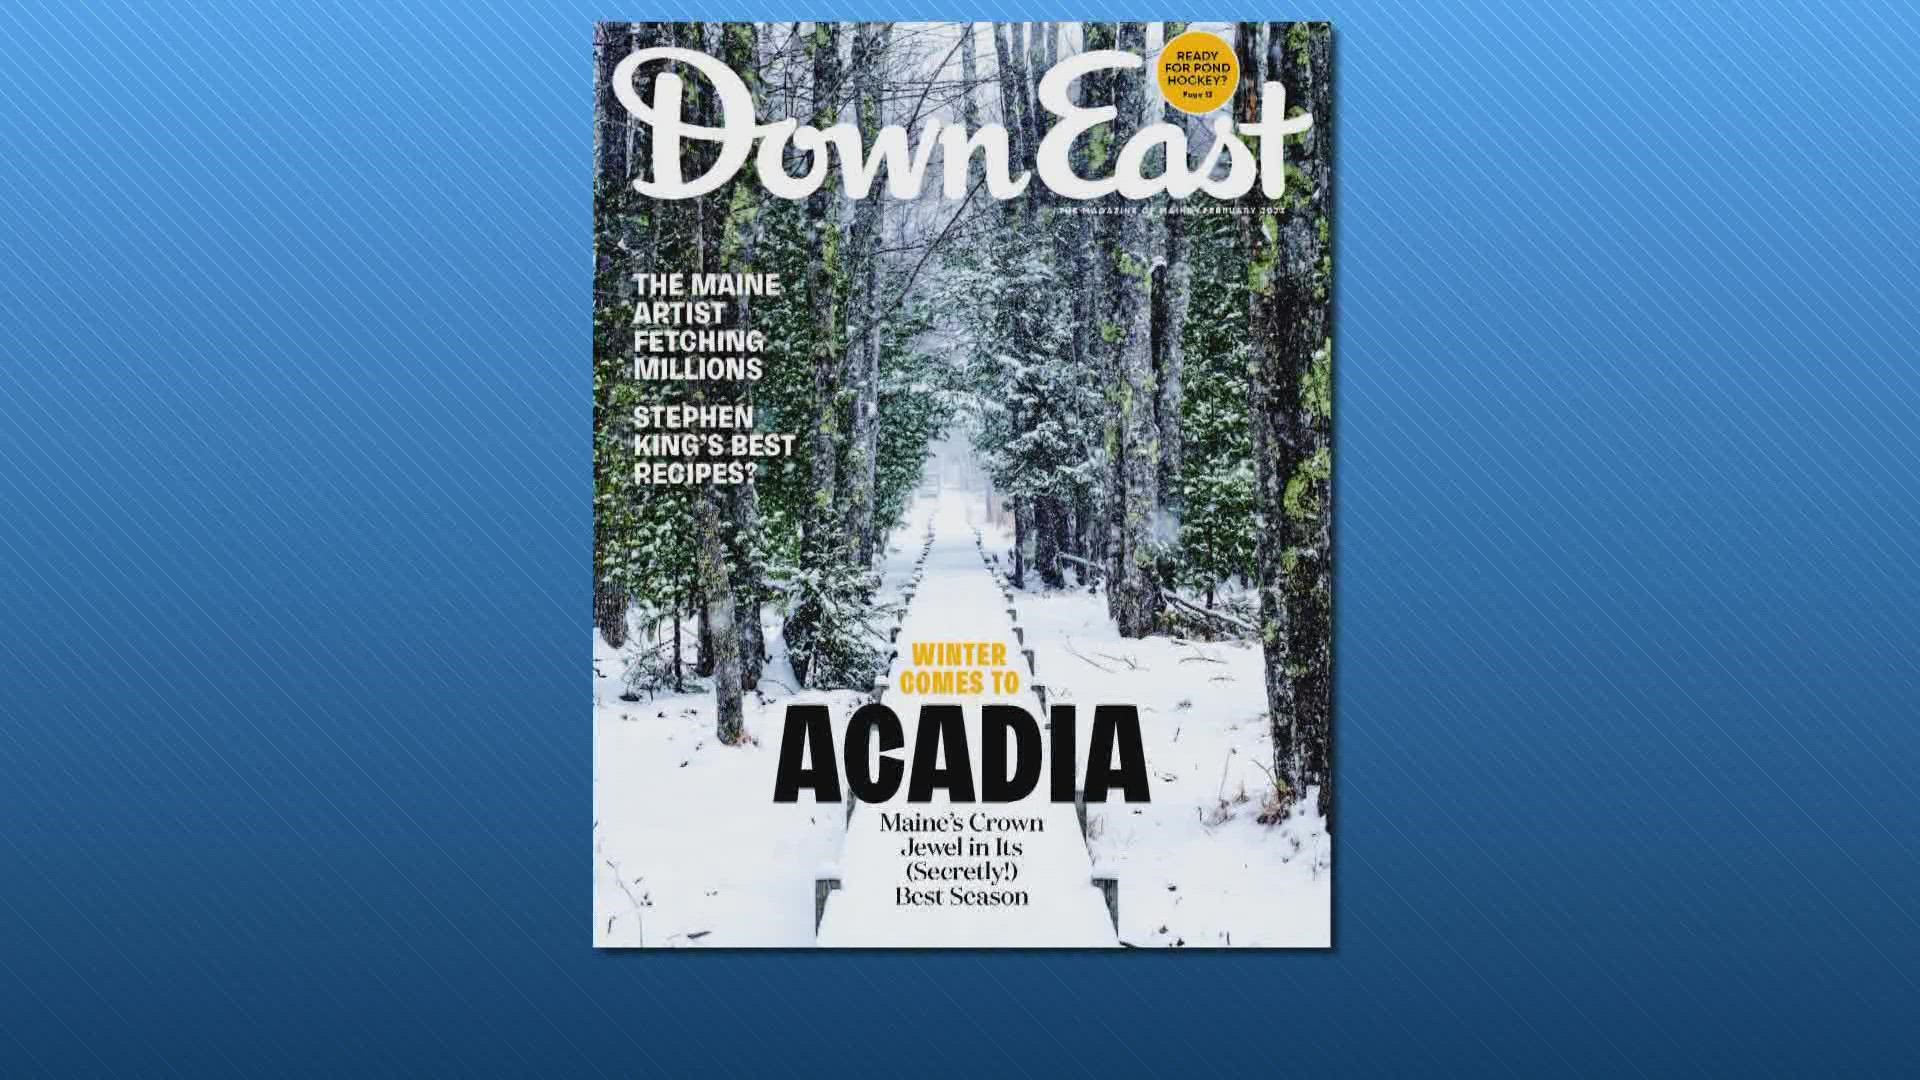 “Down East” explores the park in “its (secretly) best season”